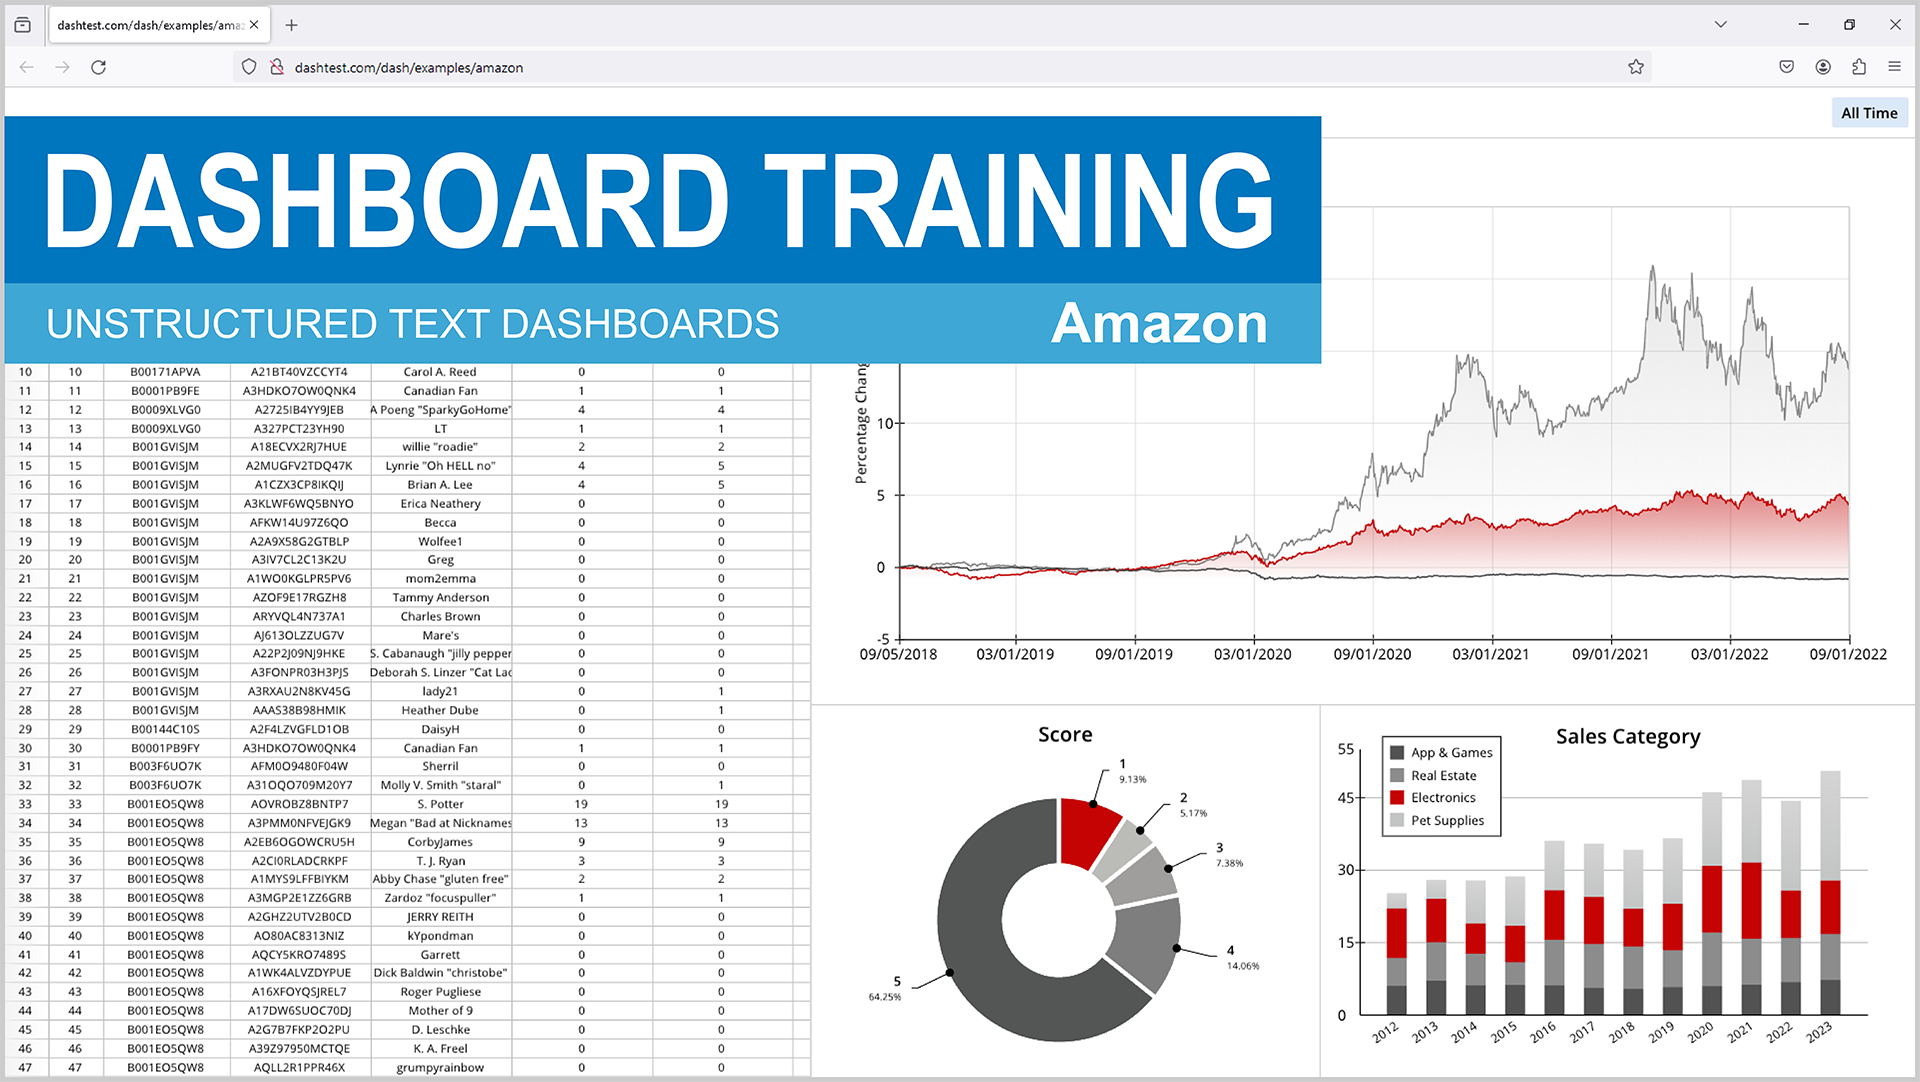 A screenshot of a dashboard training page on Amazon, featuring a variety of graphs and charts.